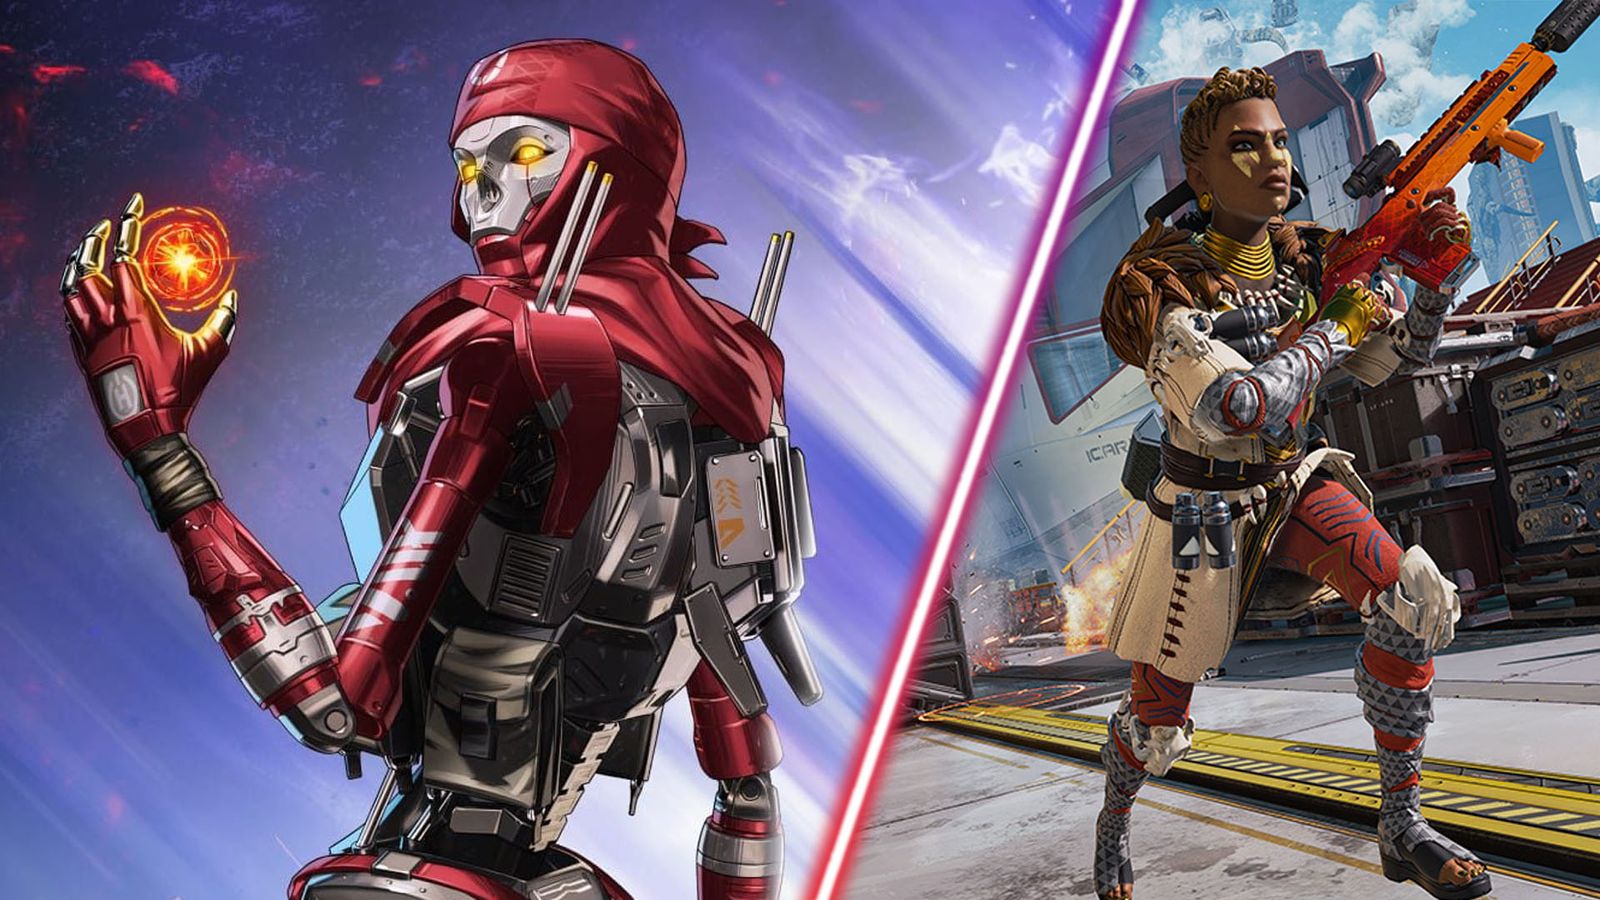 Screenshot of Apex Legend player holding an orange orb and Apex Legends player running while pointing rifle upwards